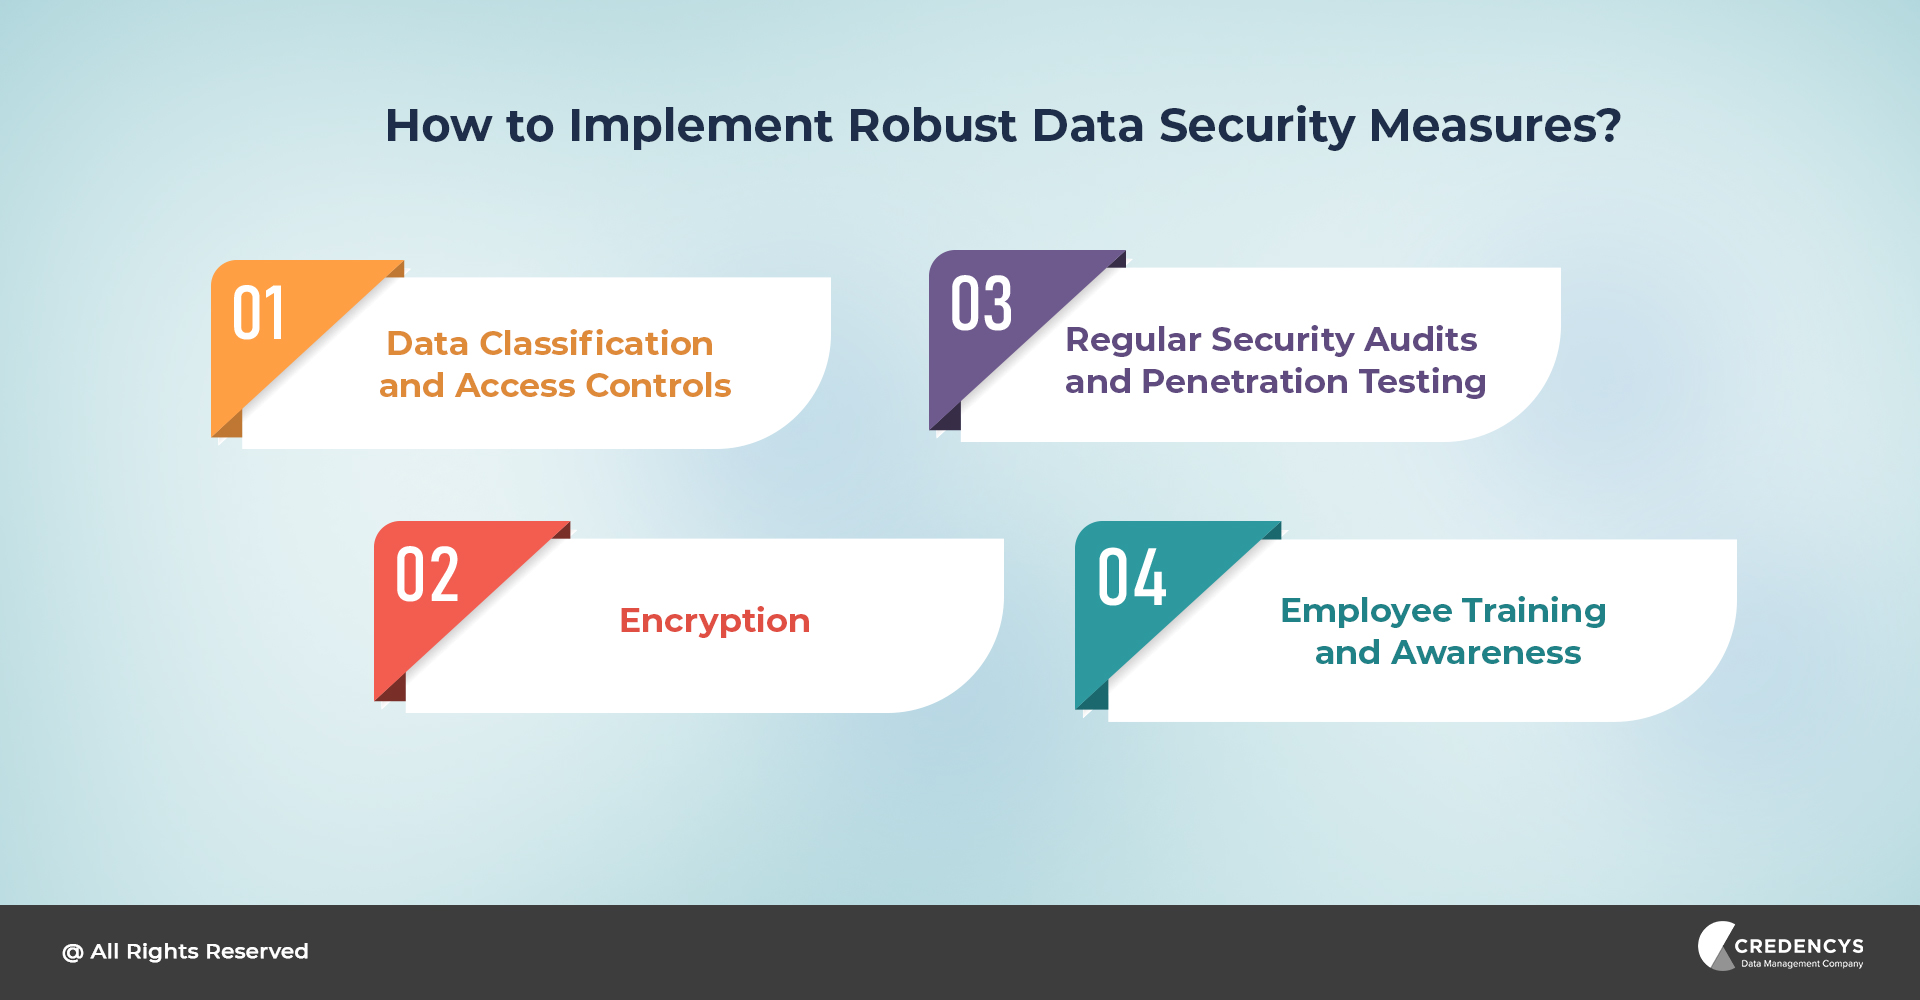 Implementing Robust Data Security Measures